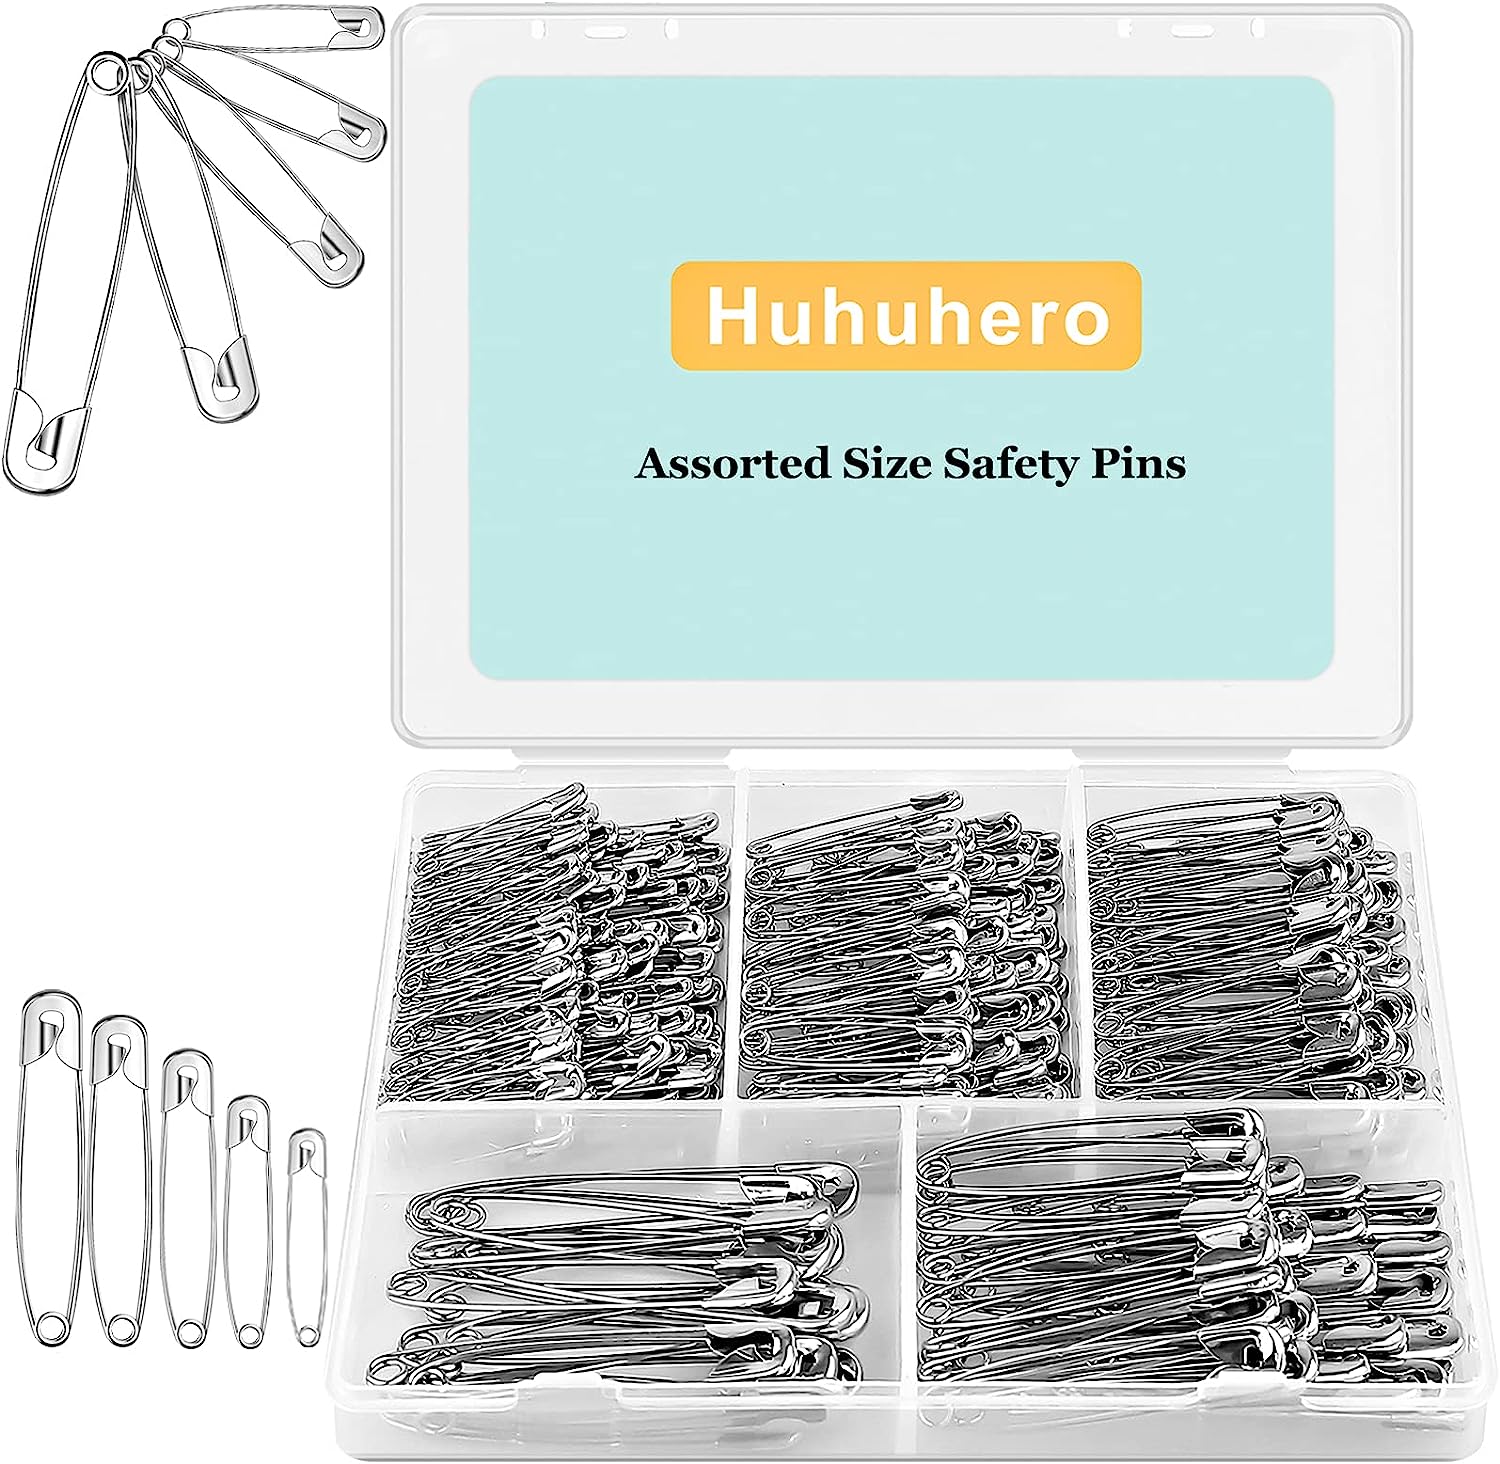 Safety Pins Assorted, 340 Pack Nickel Plated Steel [...]